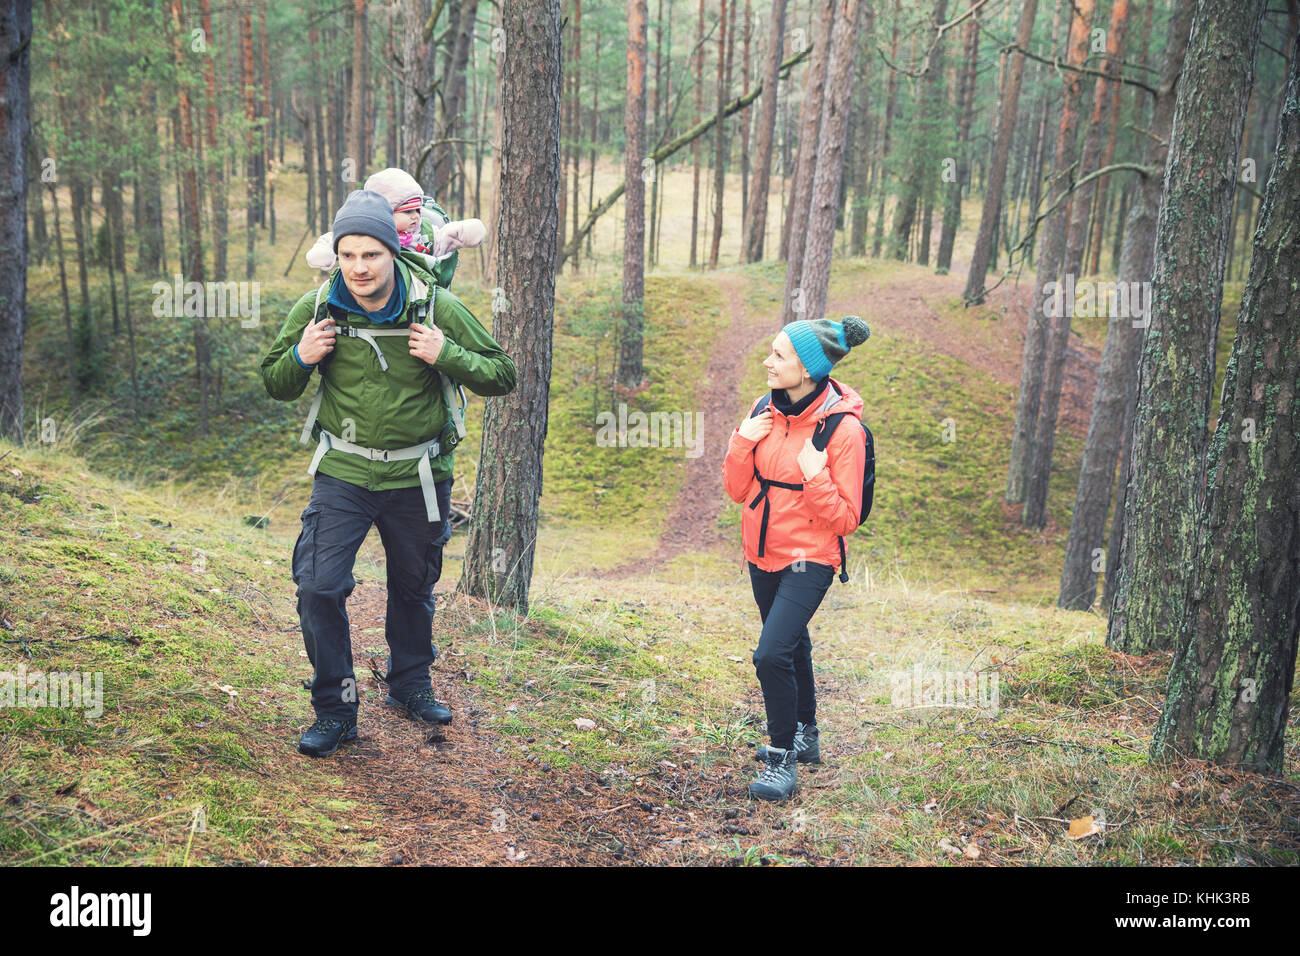 family on a hike in the forest with baby in child carrier on father's back Stock Photo